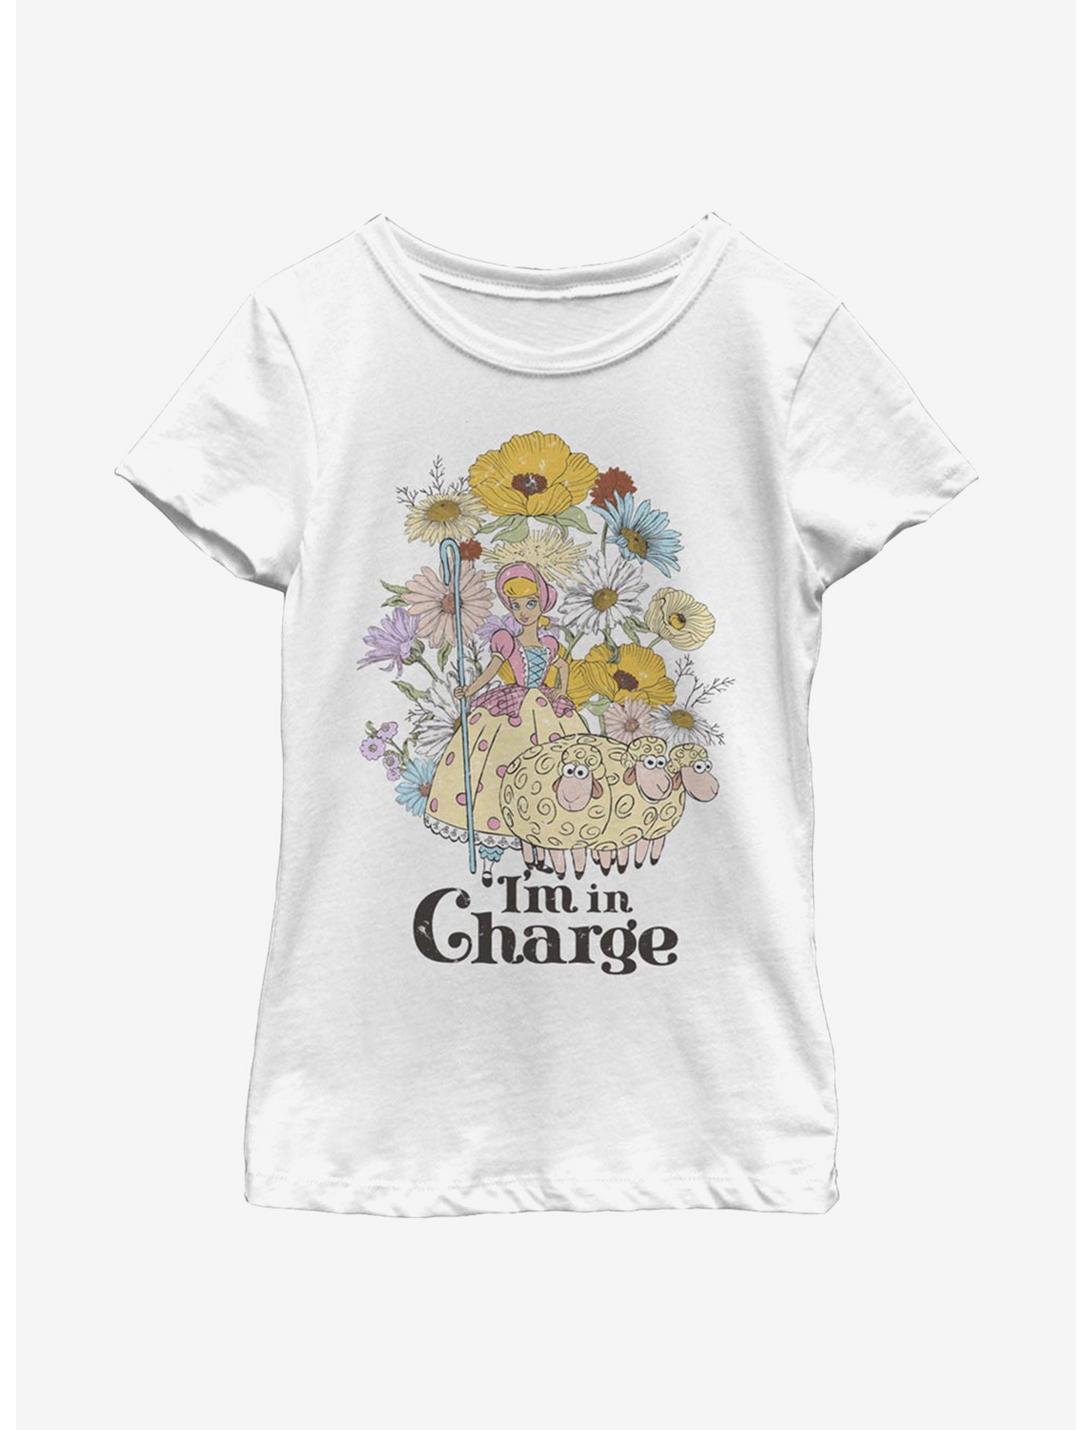 Disney Pixar Toy Story In Charge Youth Girls T-Shirt, WHITE, hi-res